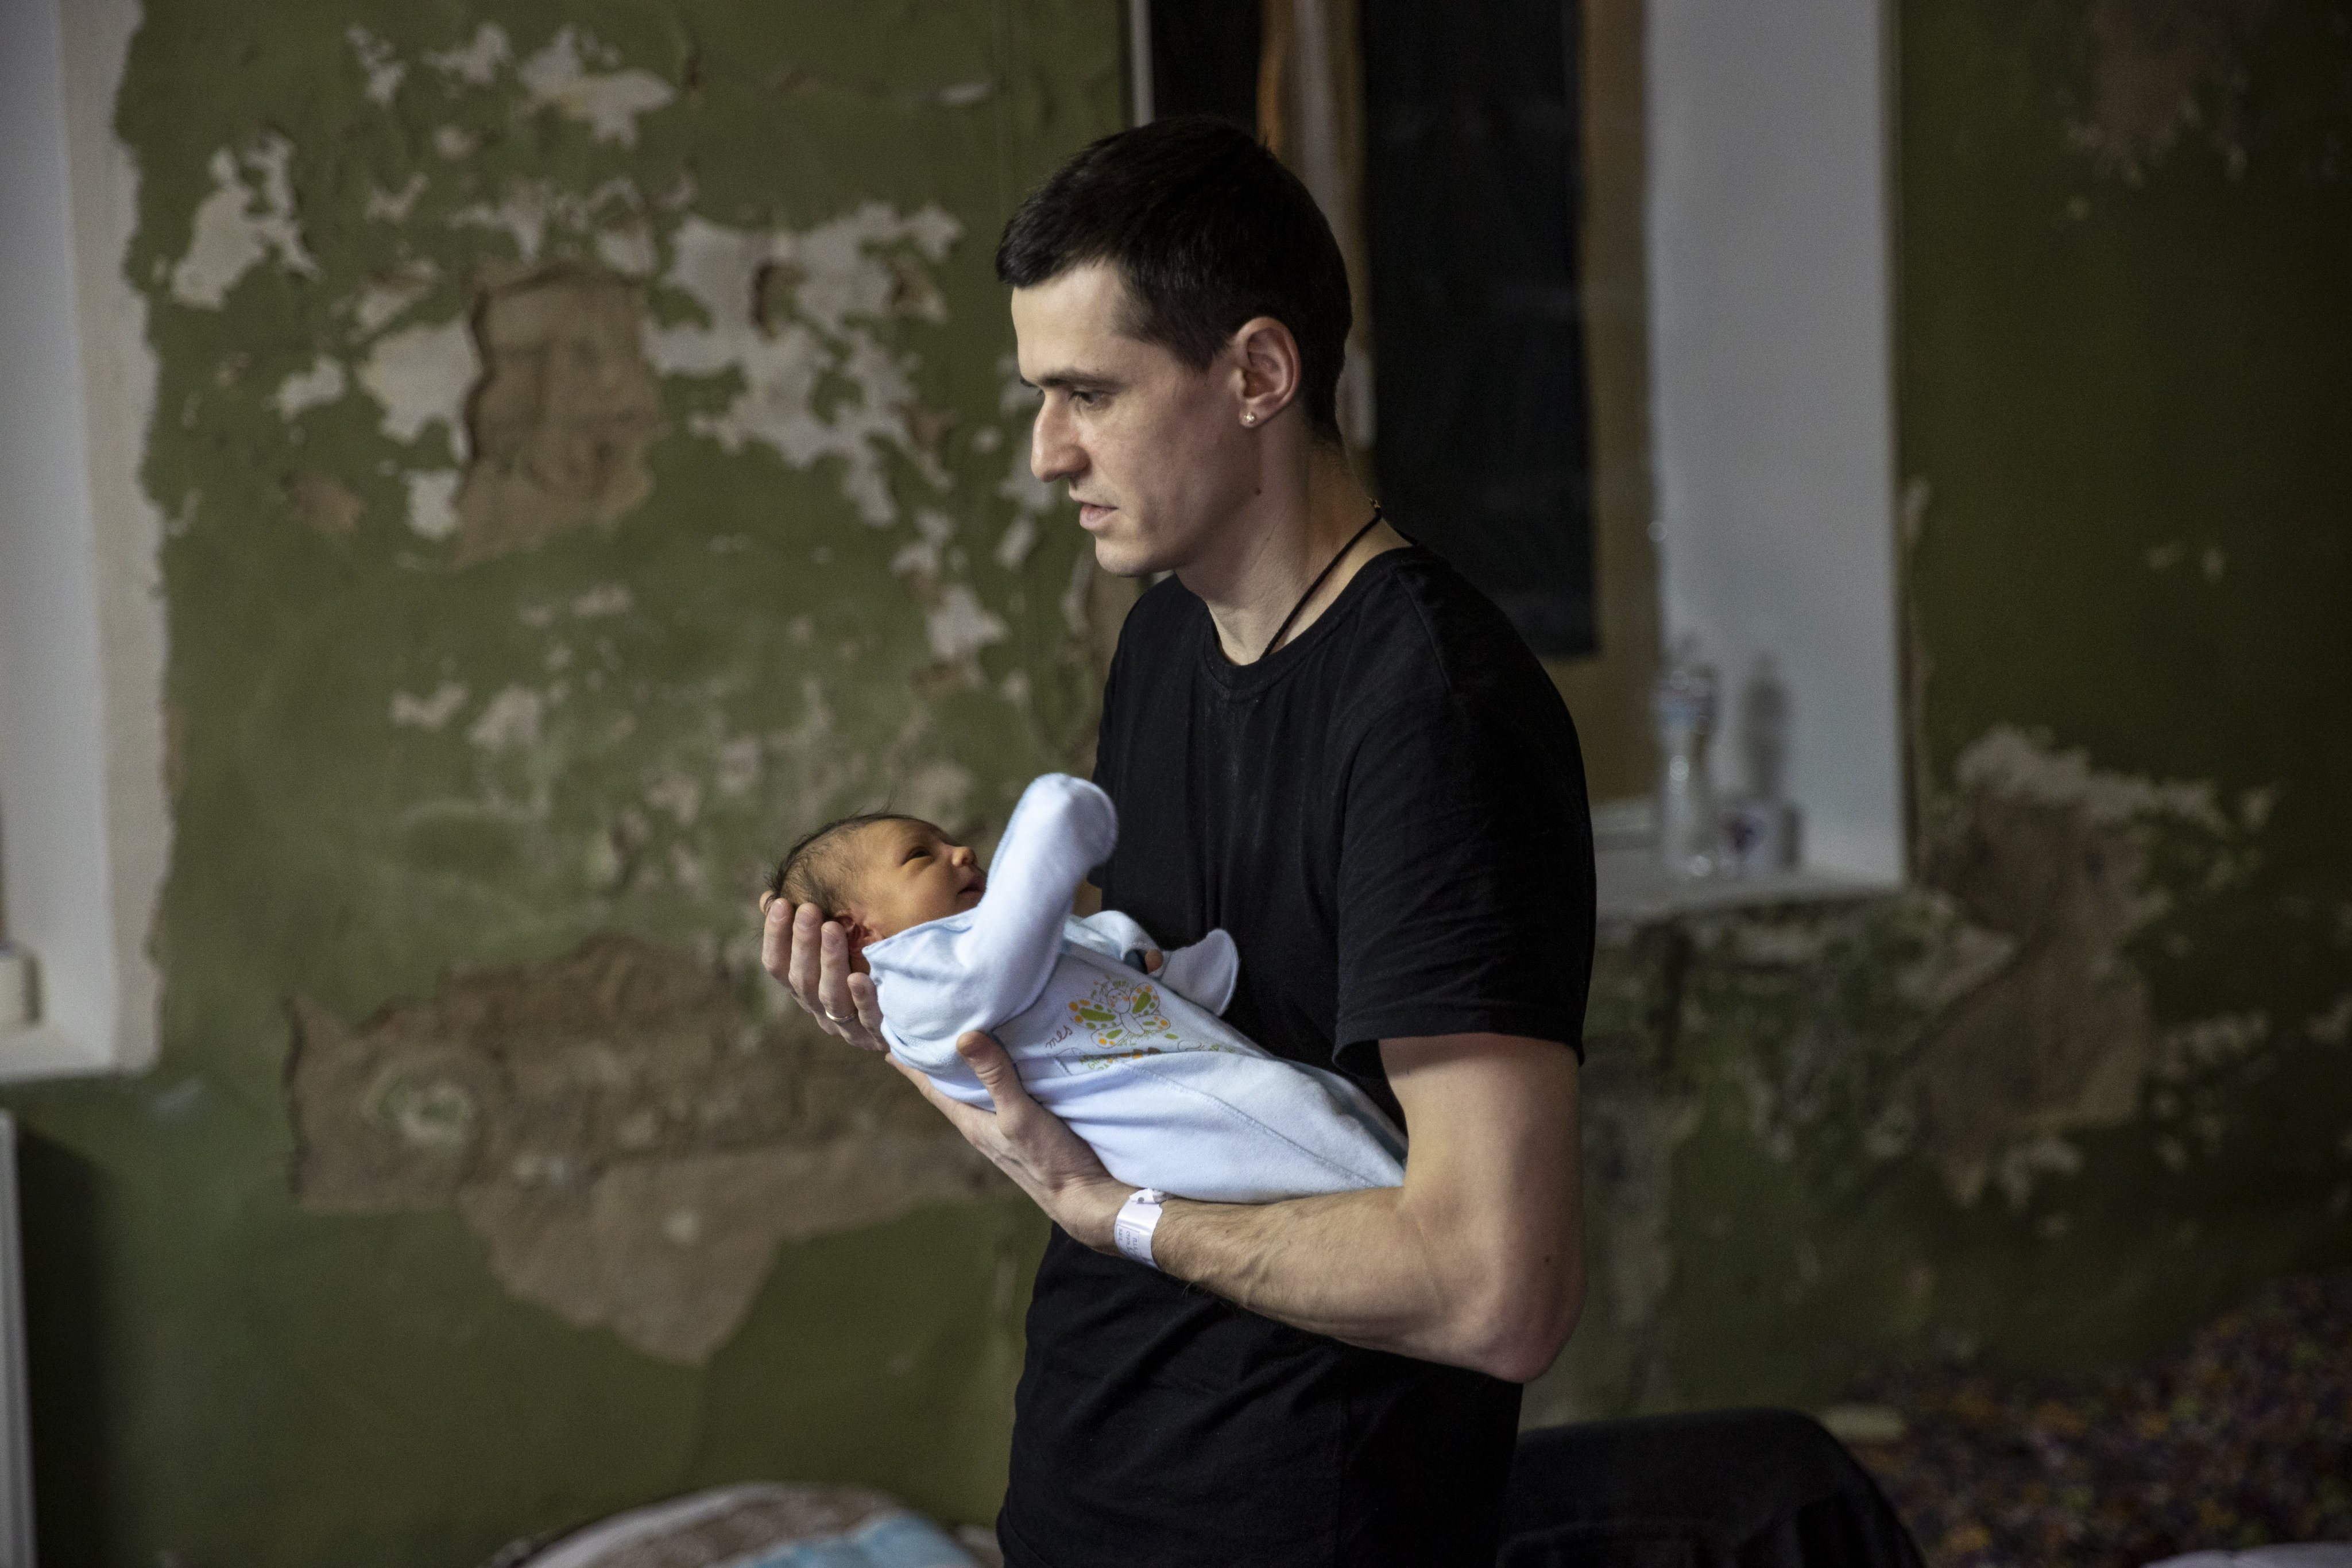 Mothers, babies shelter in basement of hospital in Kyiv